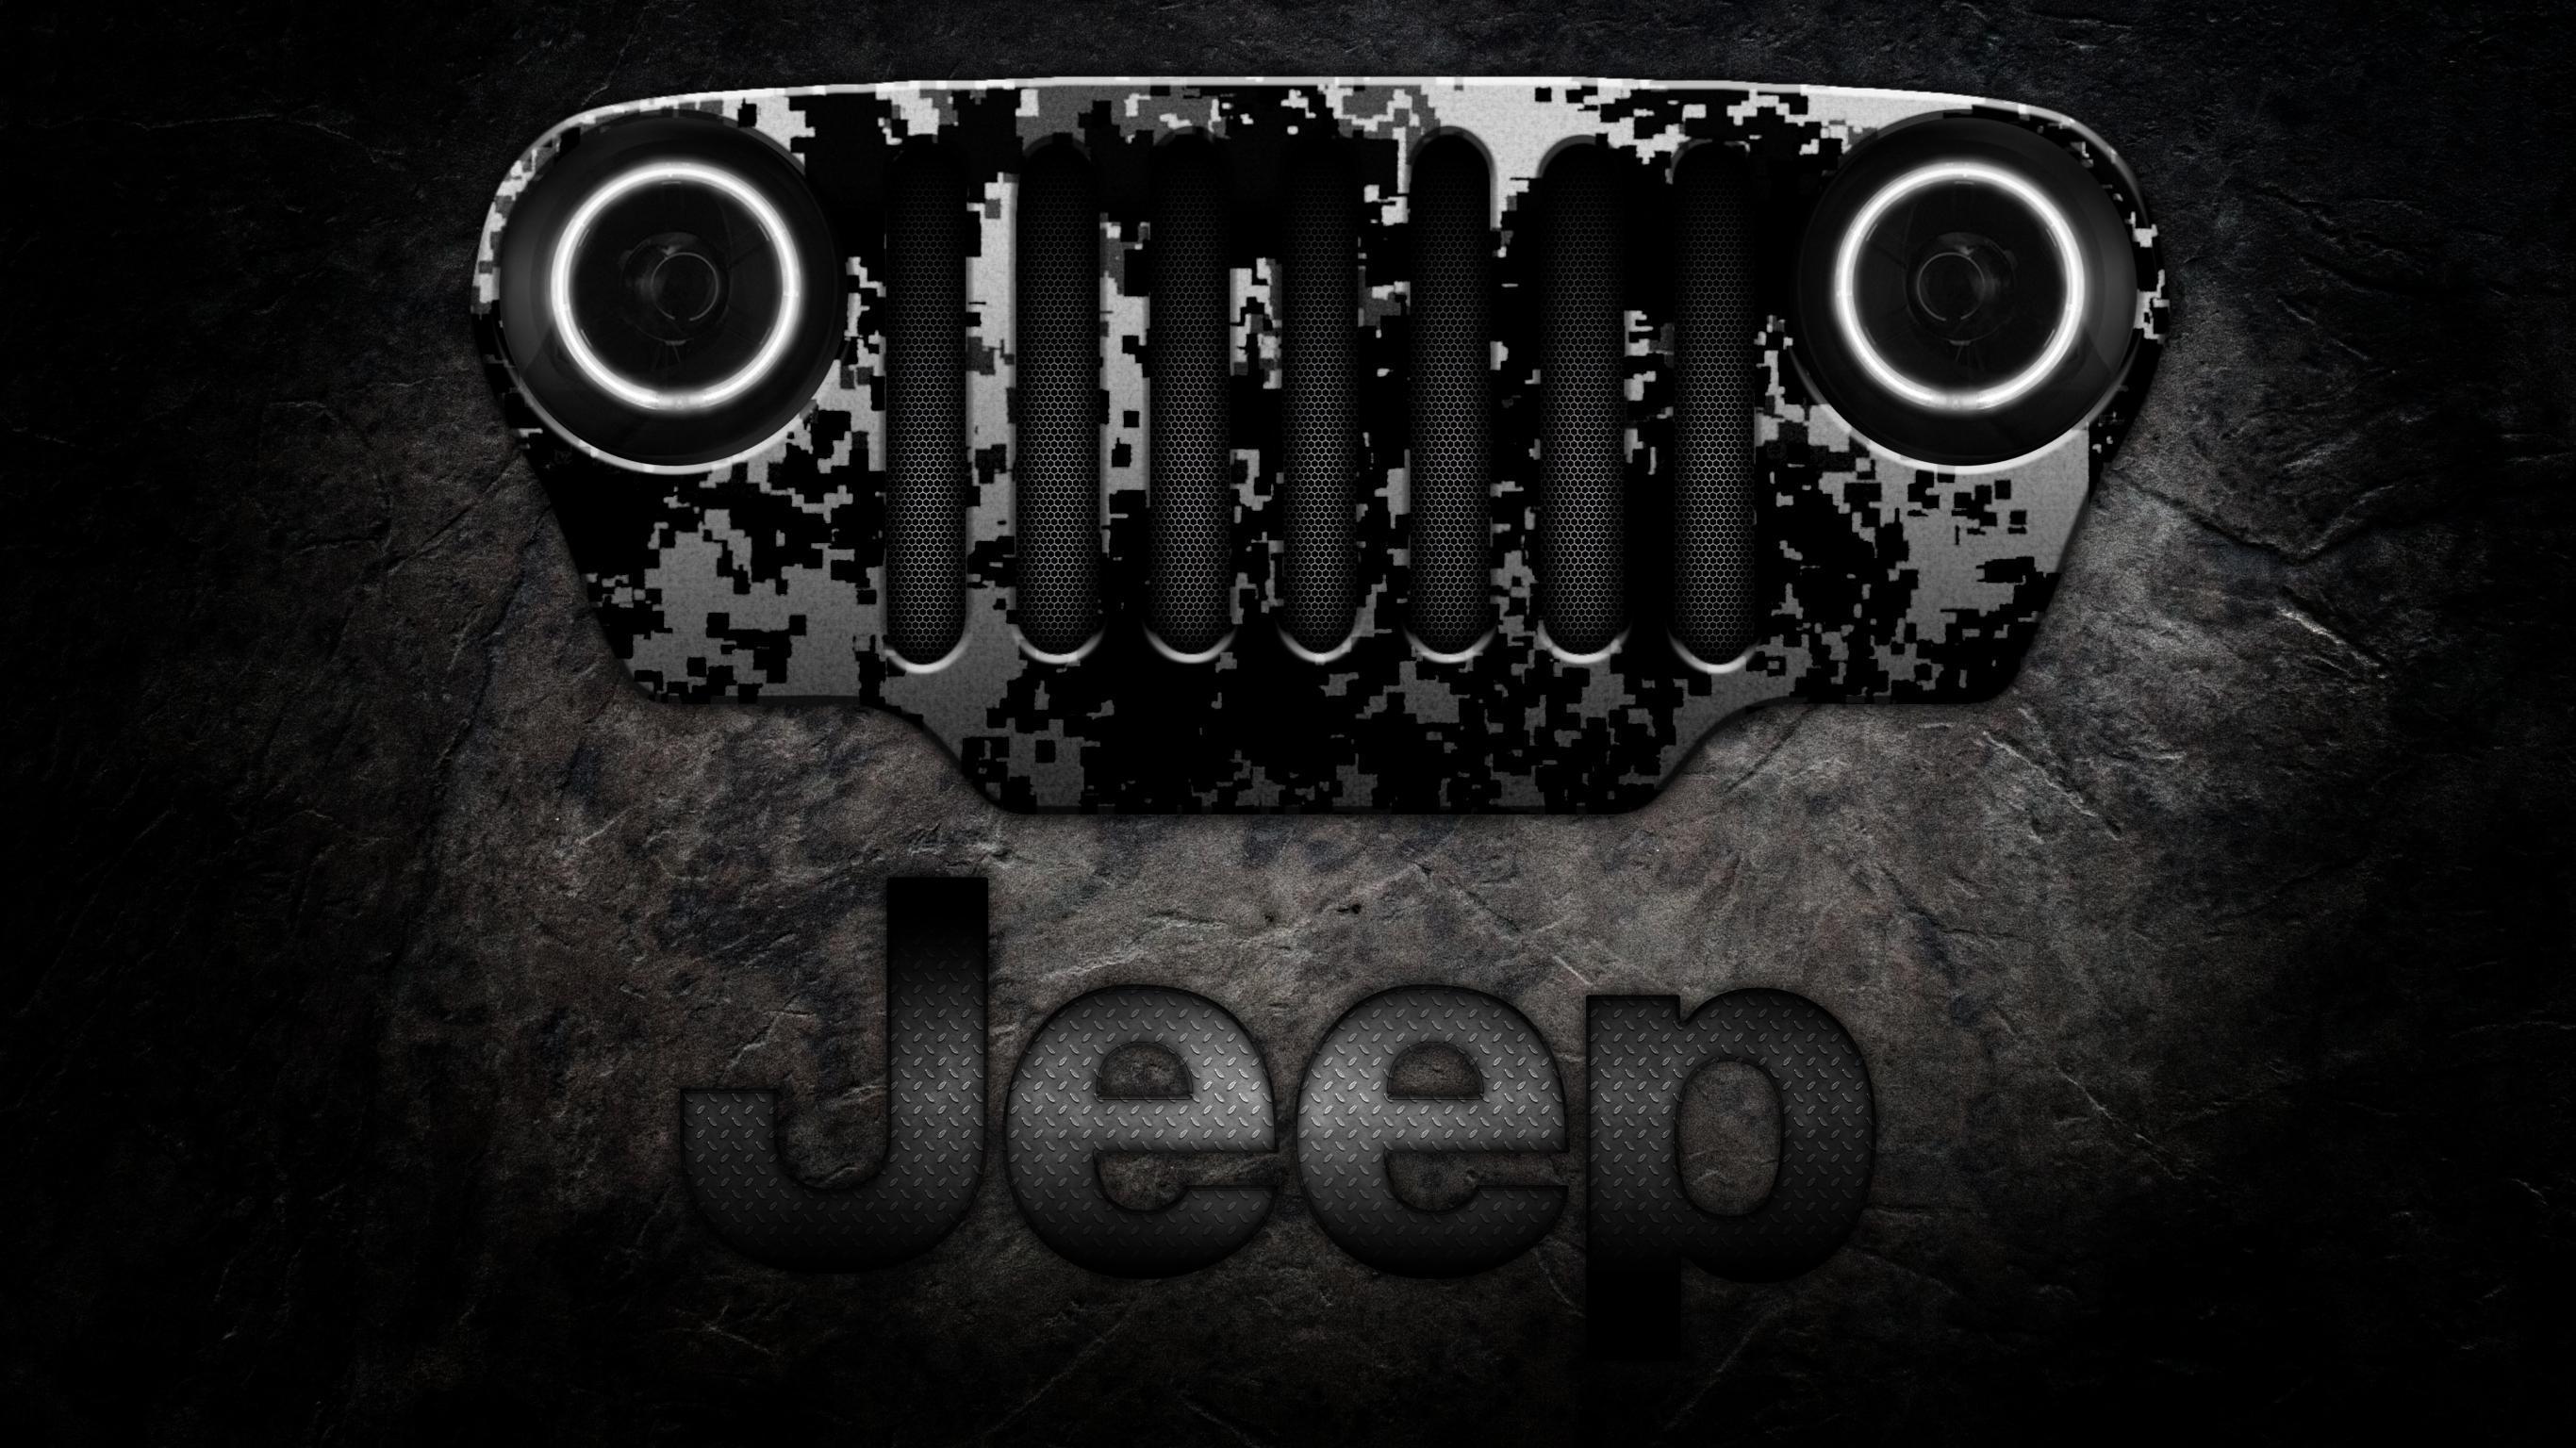 Cool Jeep Wallpapers